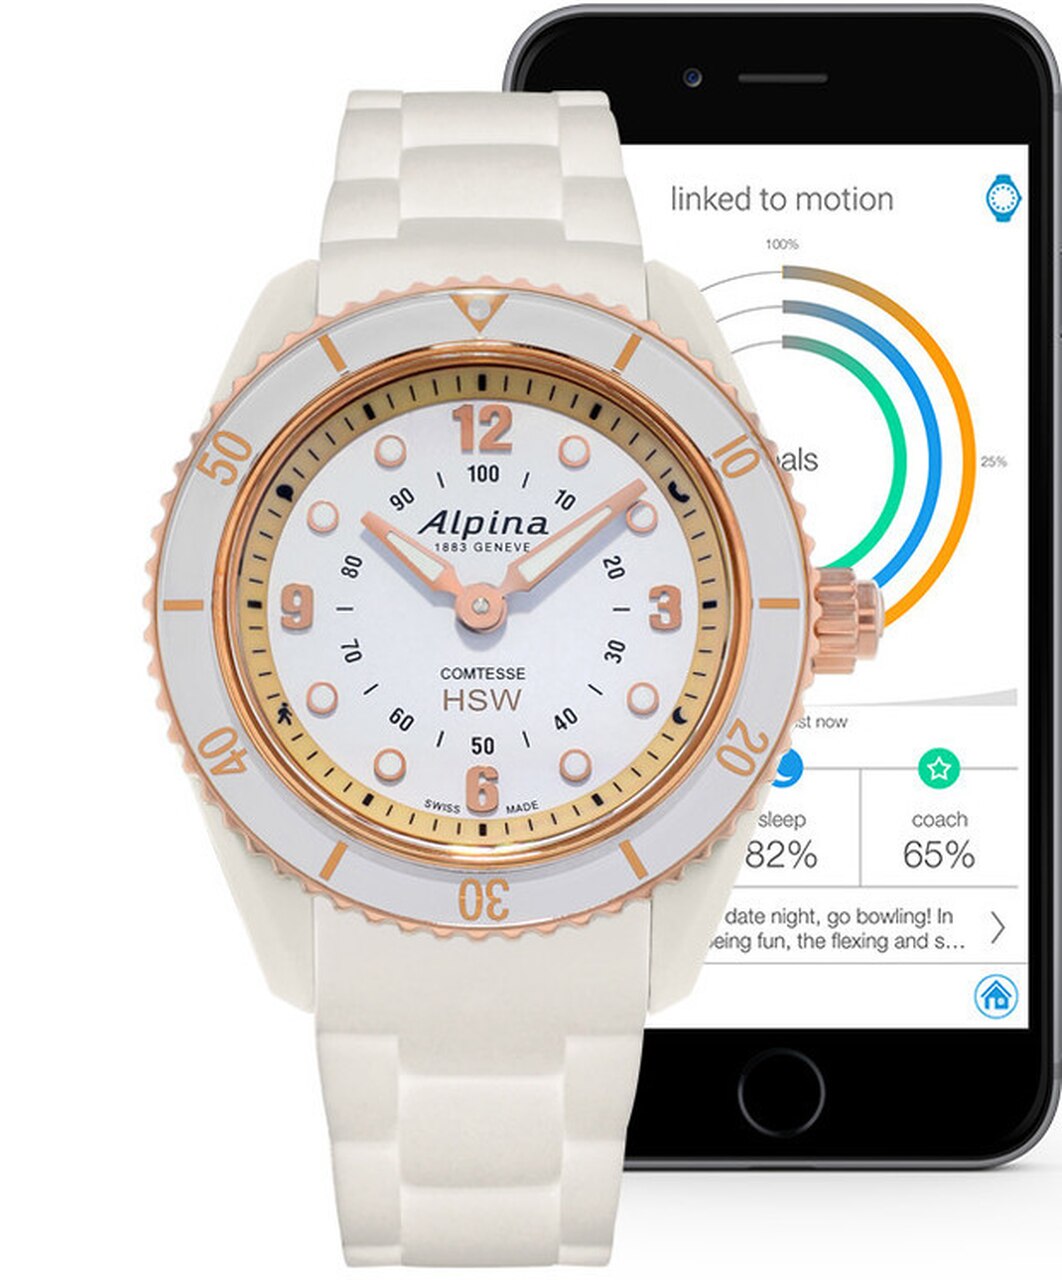 Comtesse(Ladies) Horological Smartwatch (White and Rose-Gold) | Alpina | Luby 